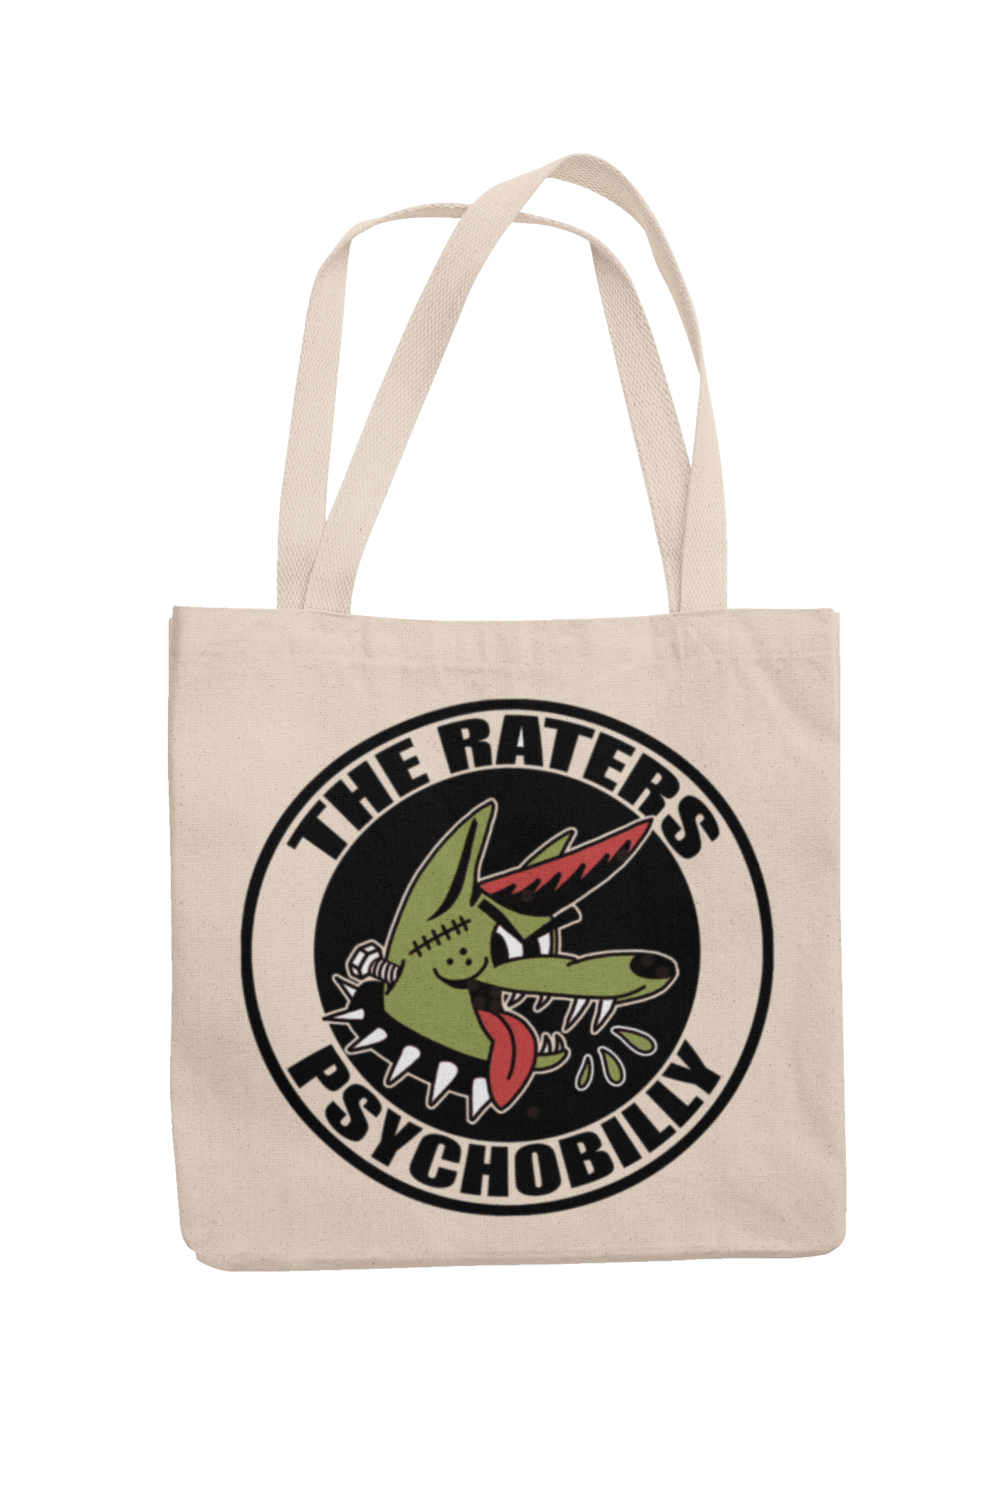 THE RATERS Cotton Bag  PSYCHOBILLY